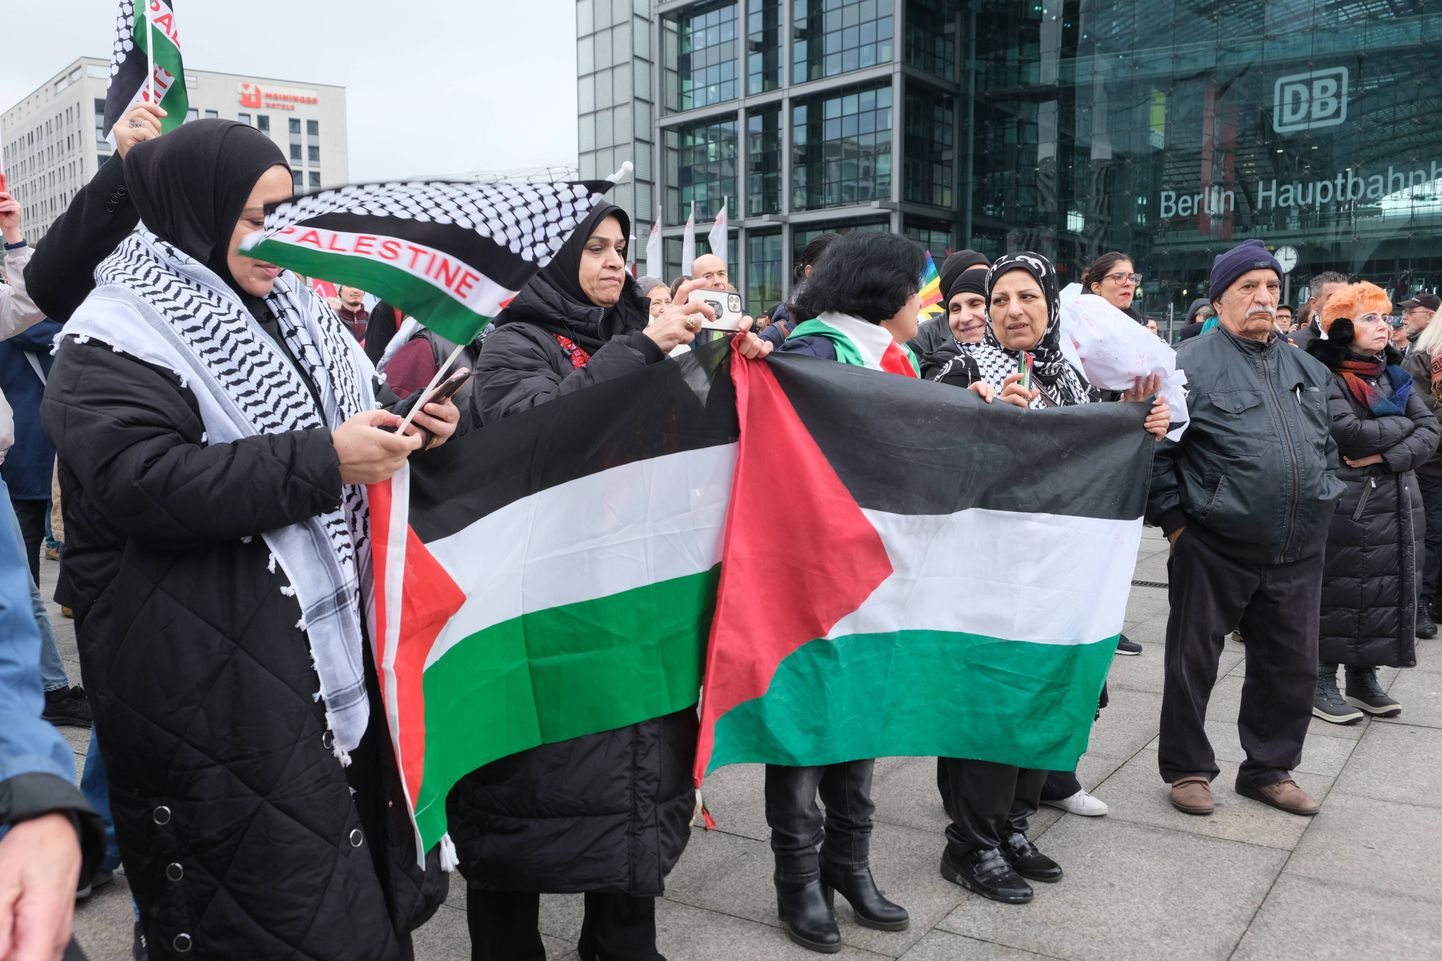 A protest in solidarity with Gaza in Berlin.